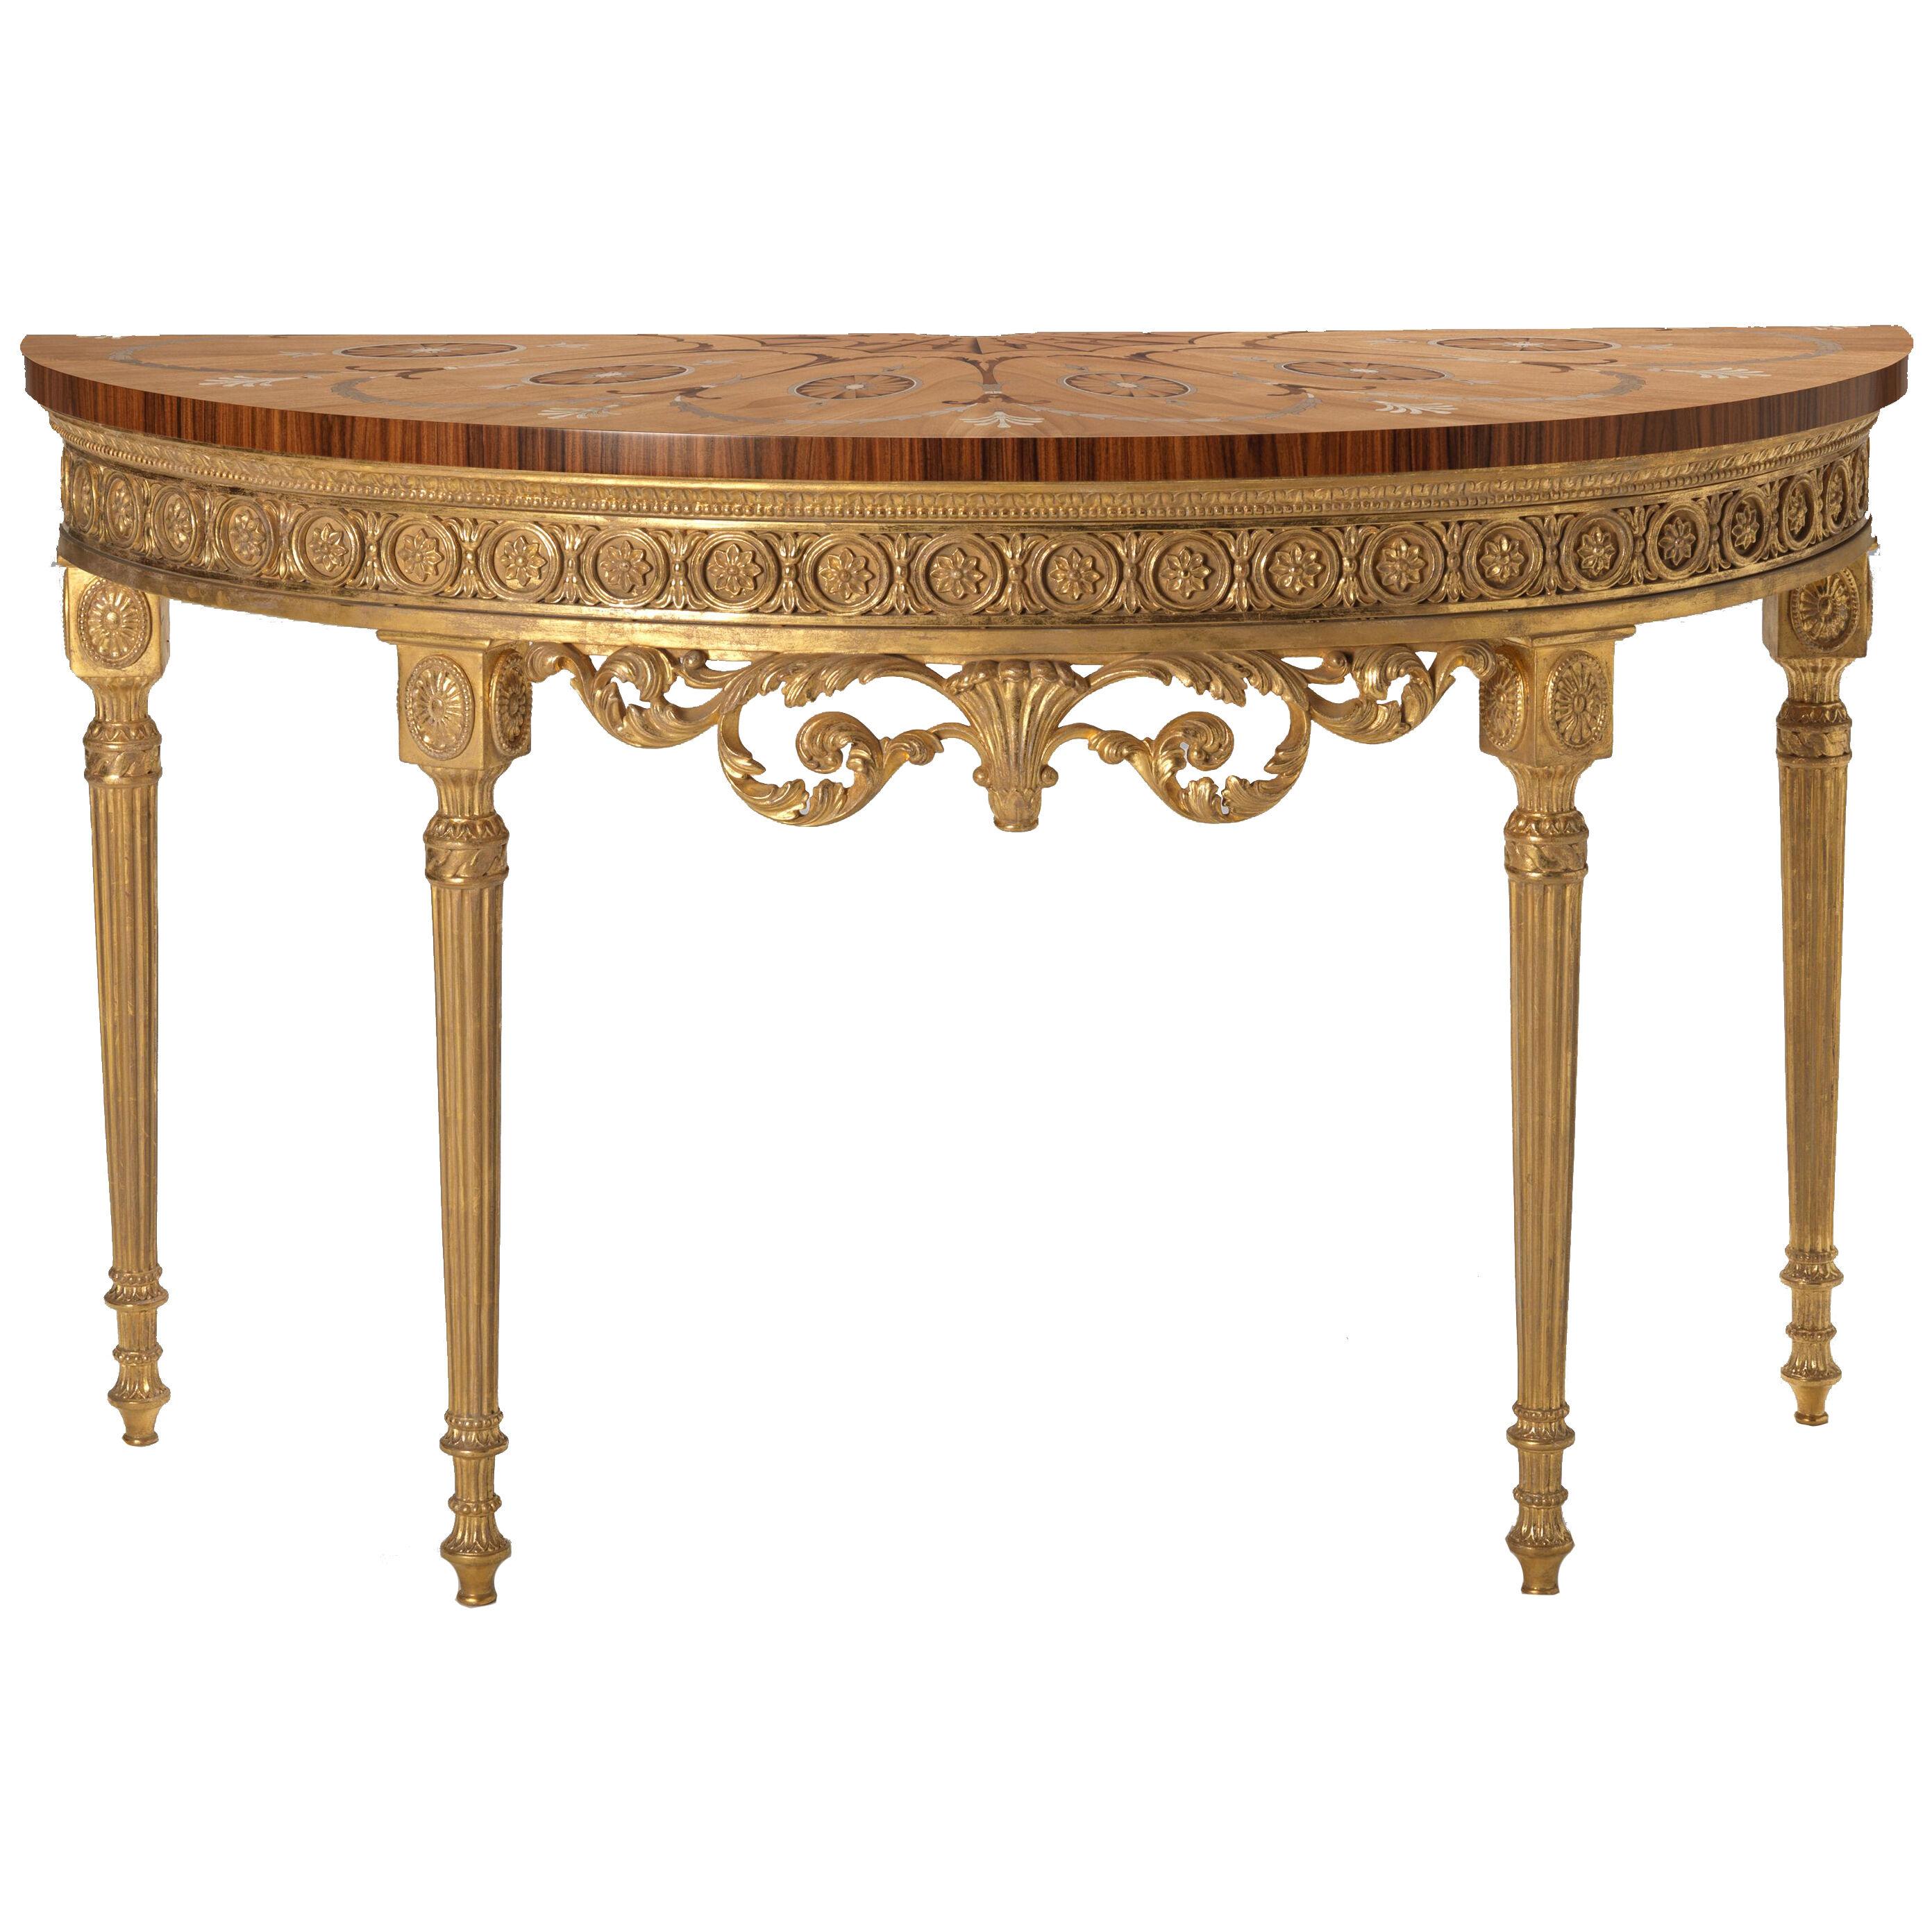 The Harewood Console